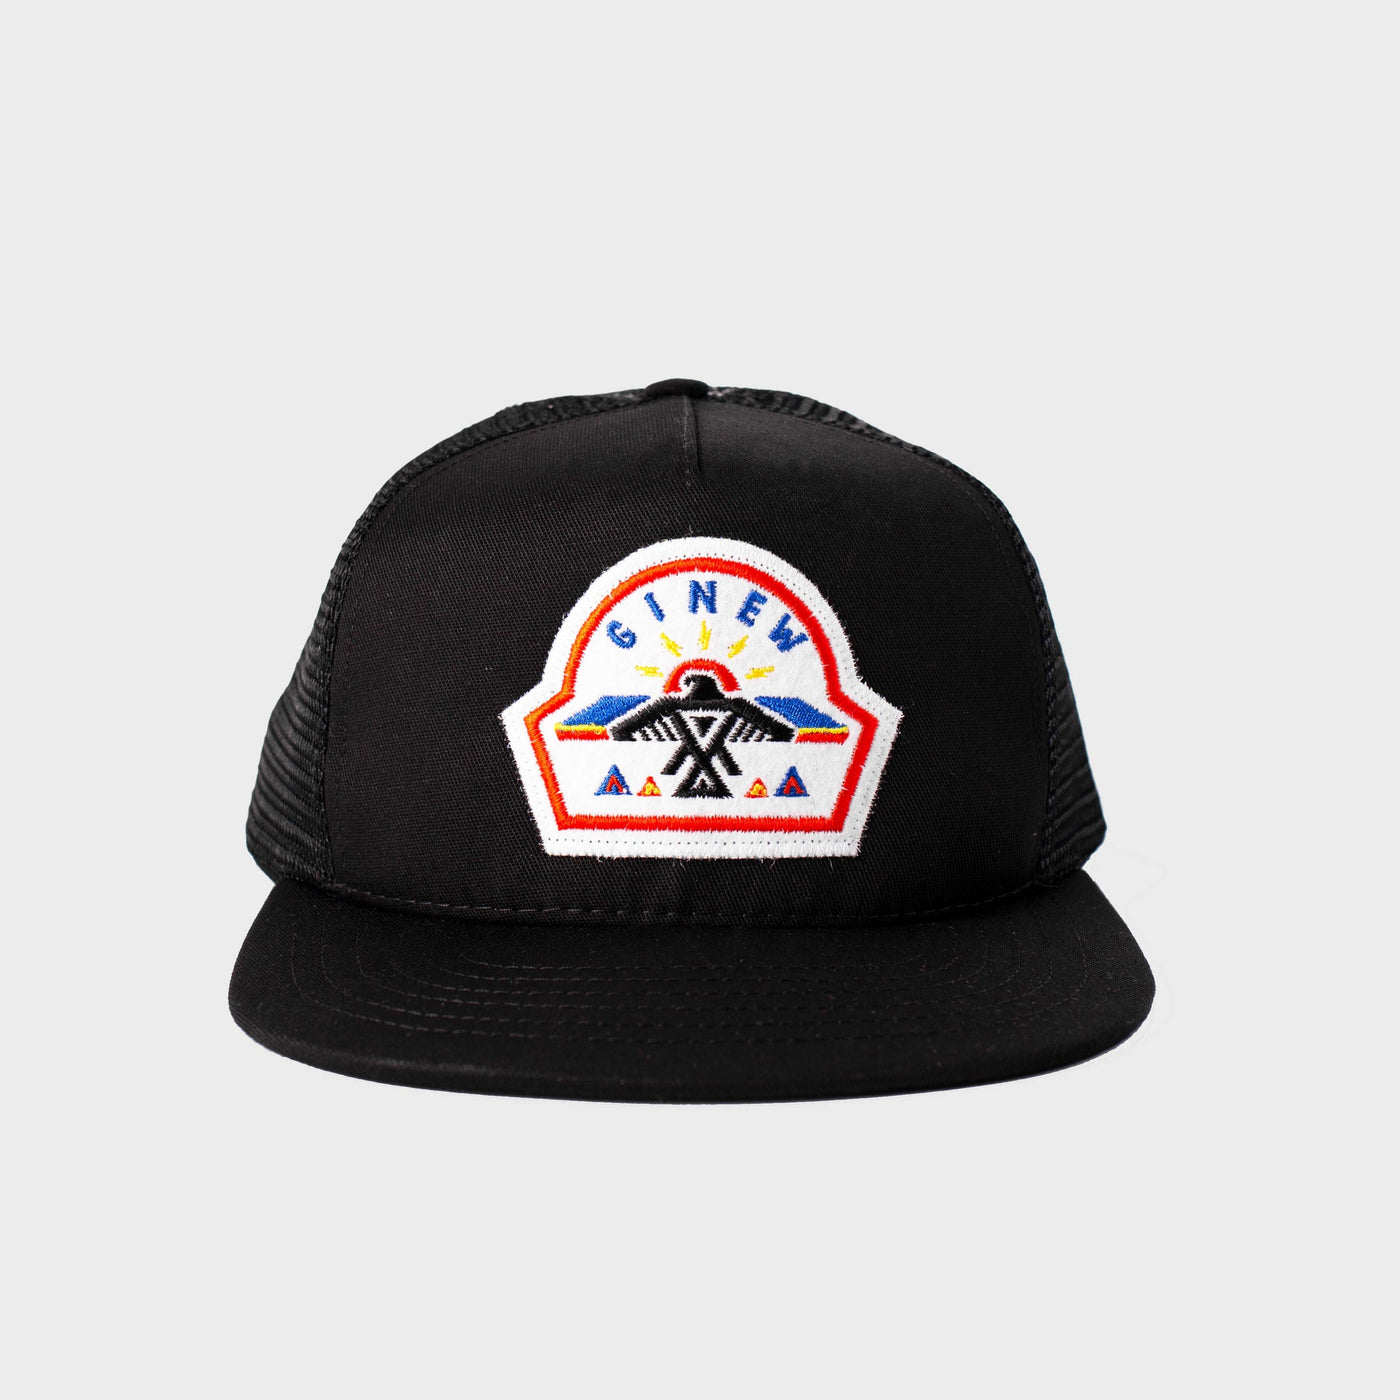 A black Trucker Hat with a white Ginew patch sewn at center front is shown on a white background. The patch features a thunderbird design stitched from blue, black, red, yellow, and orange thread.